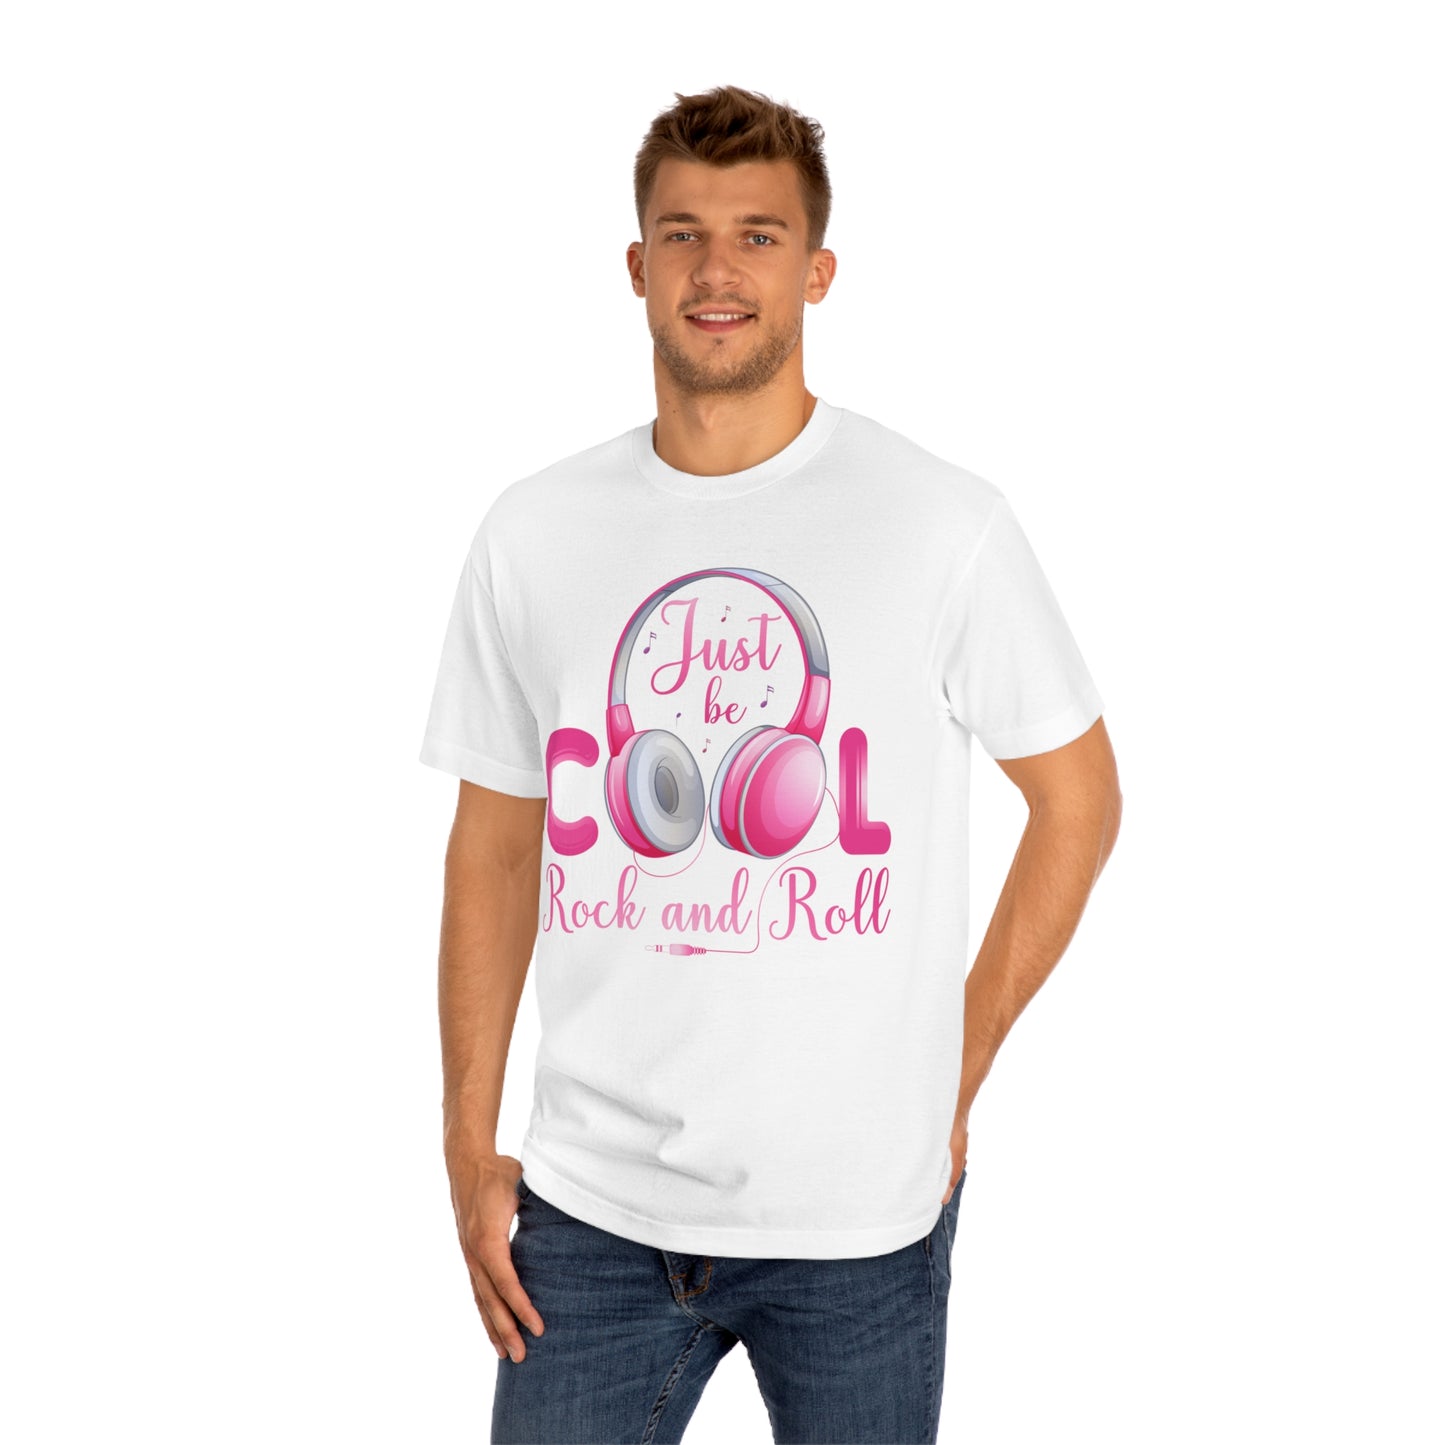 Just be cool rock and roll Unisex Classic Tee